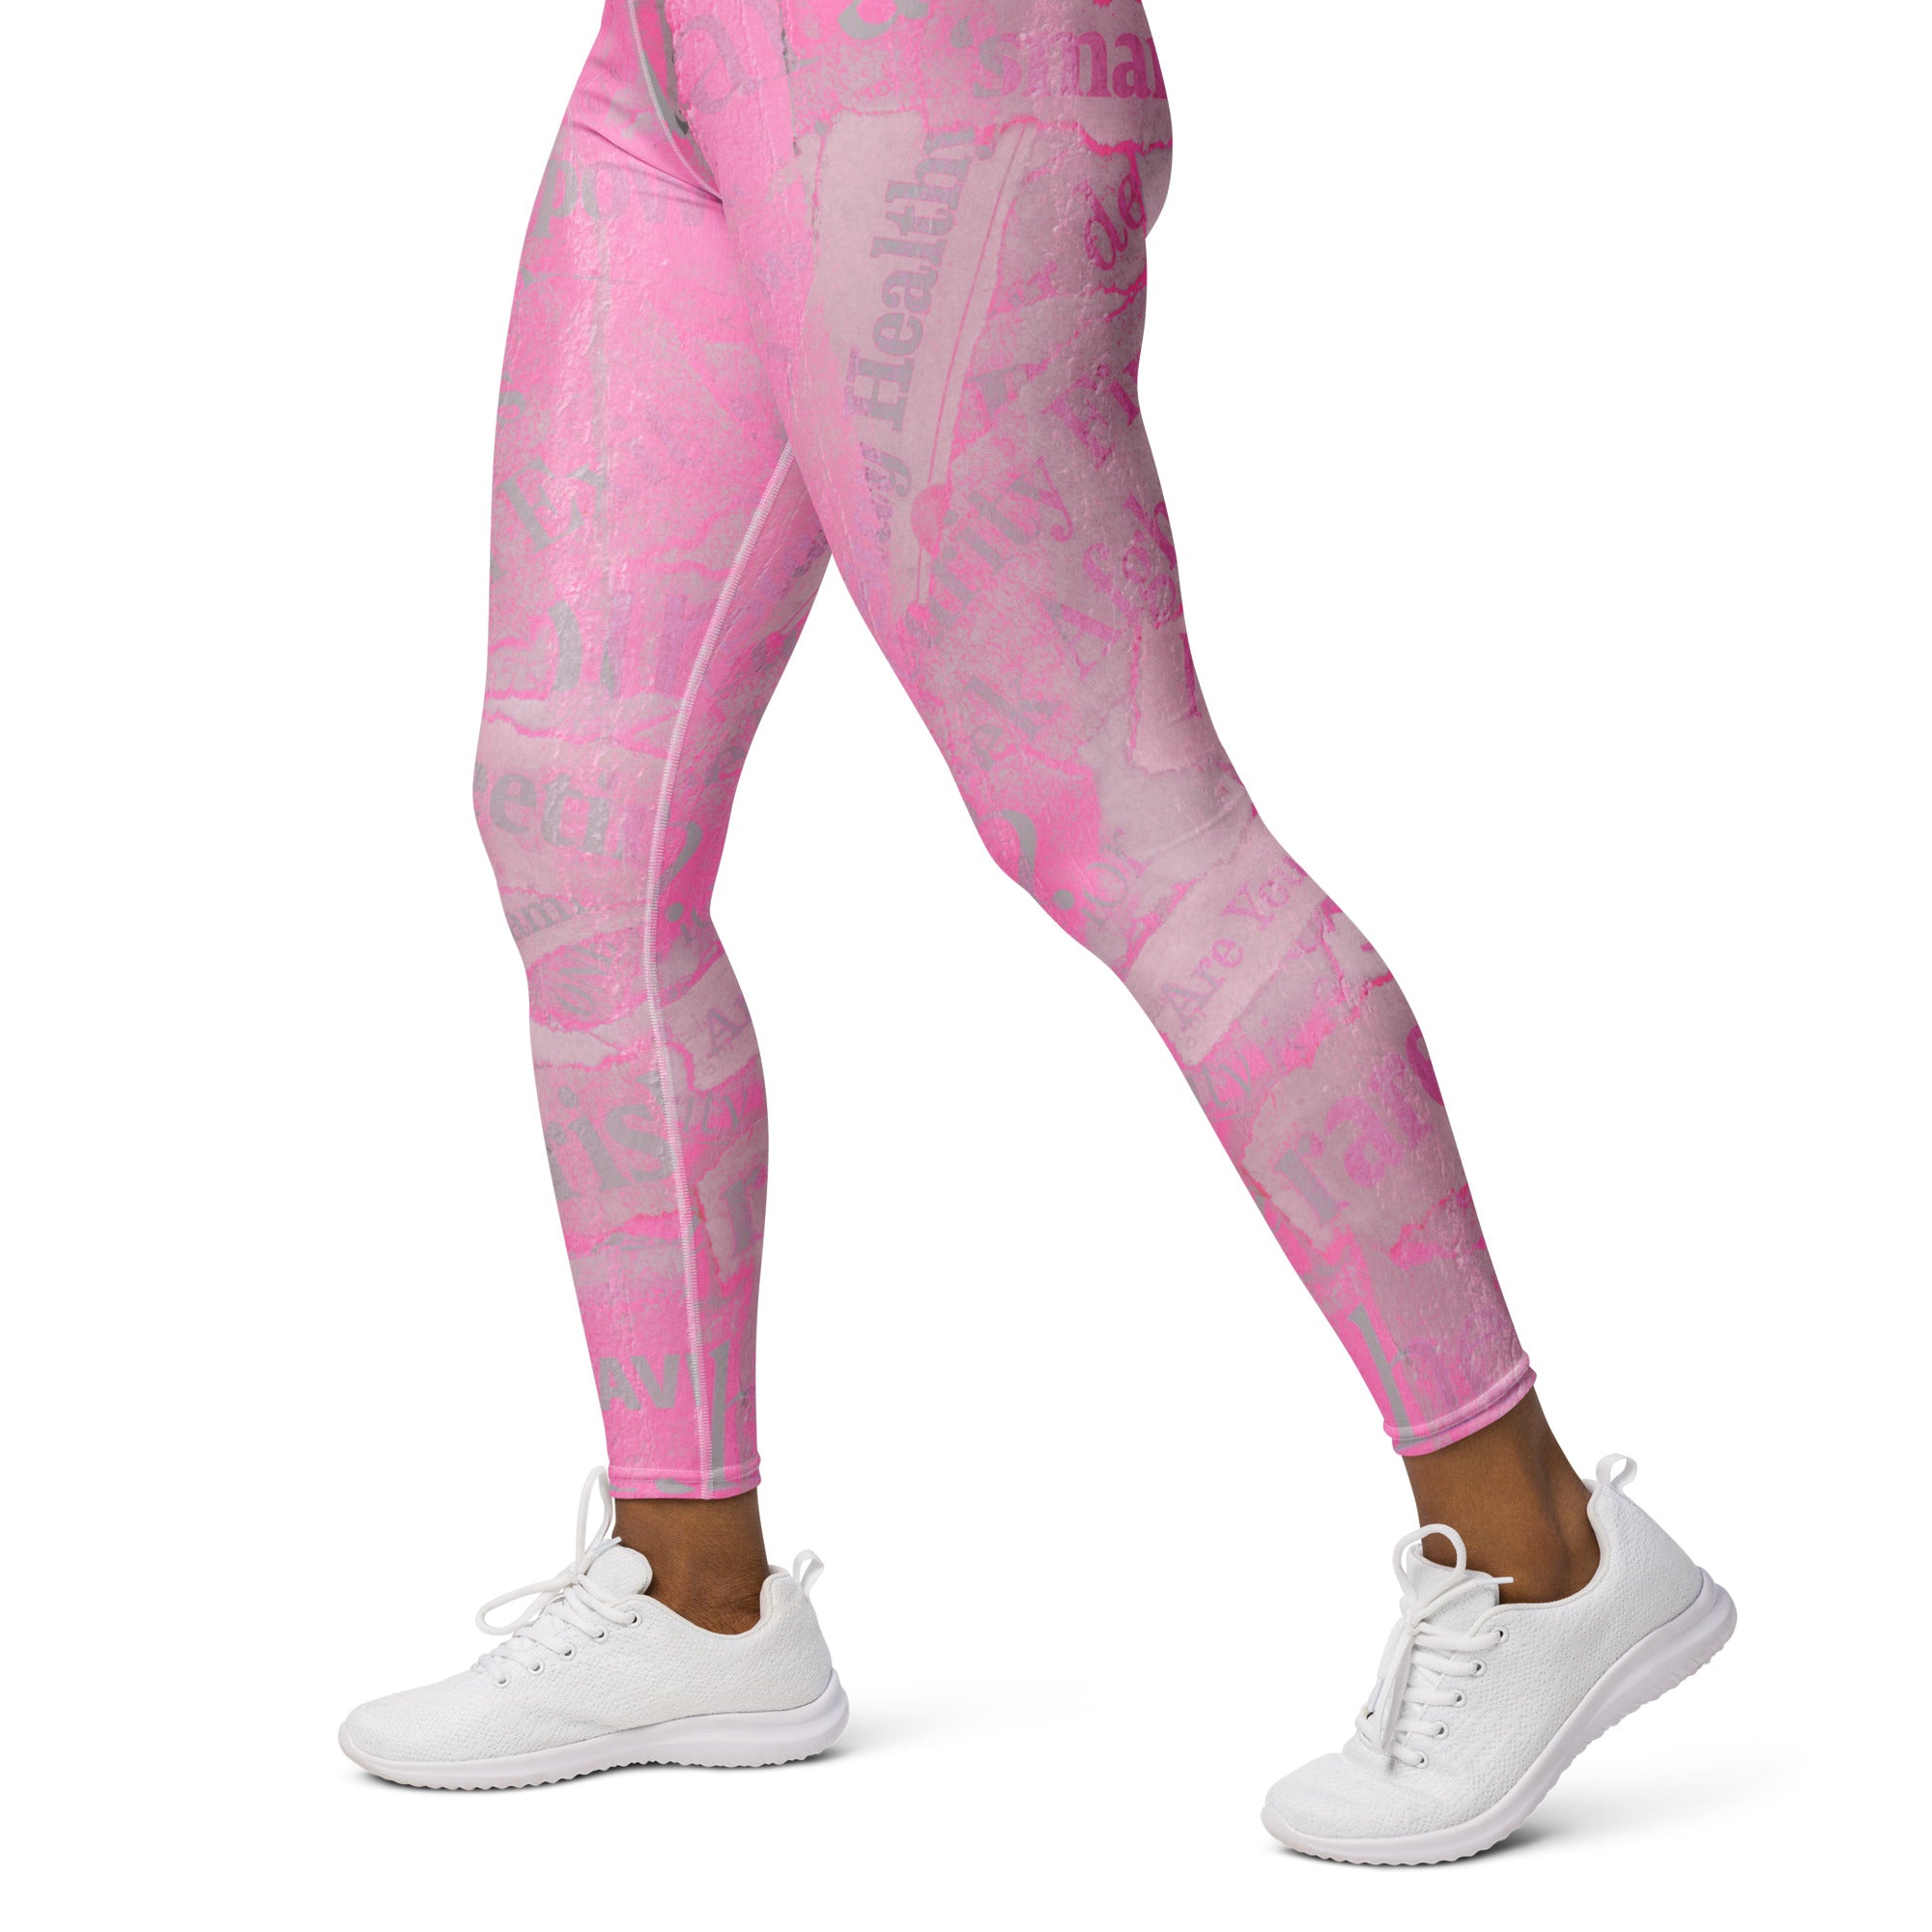 Lifestyle image of Tabloid Treasures Yoga Leggings for fitness and fashion.